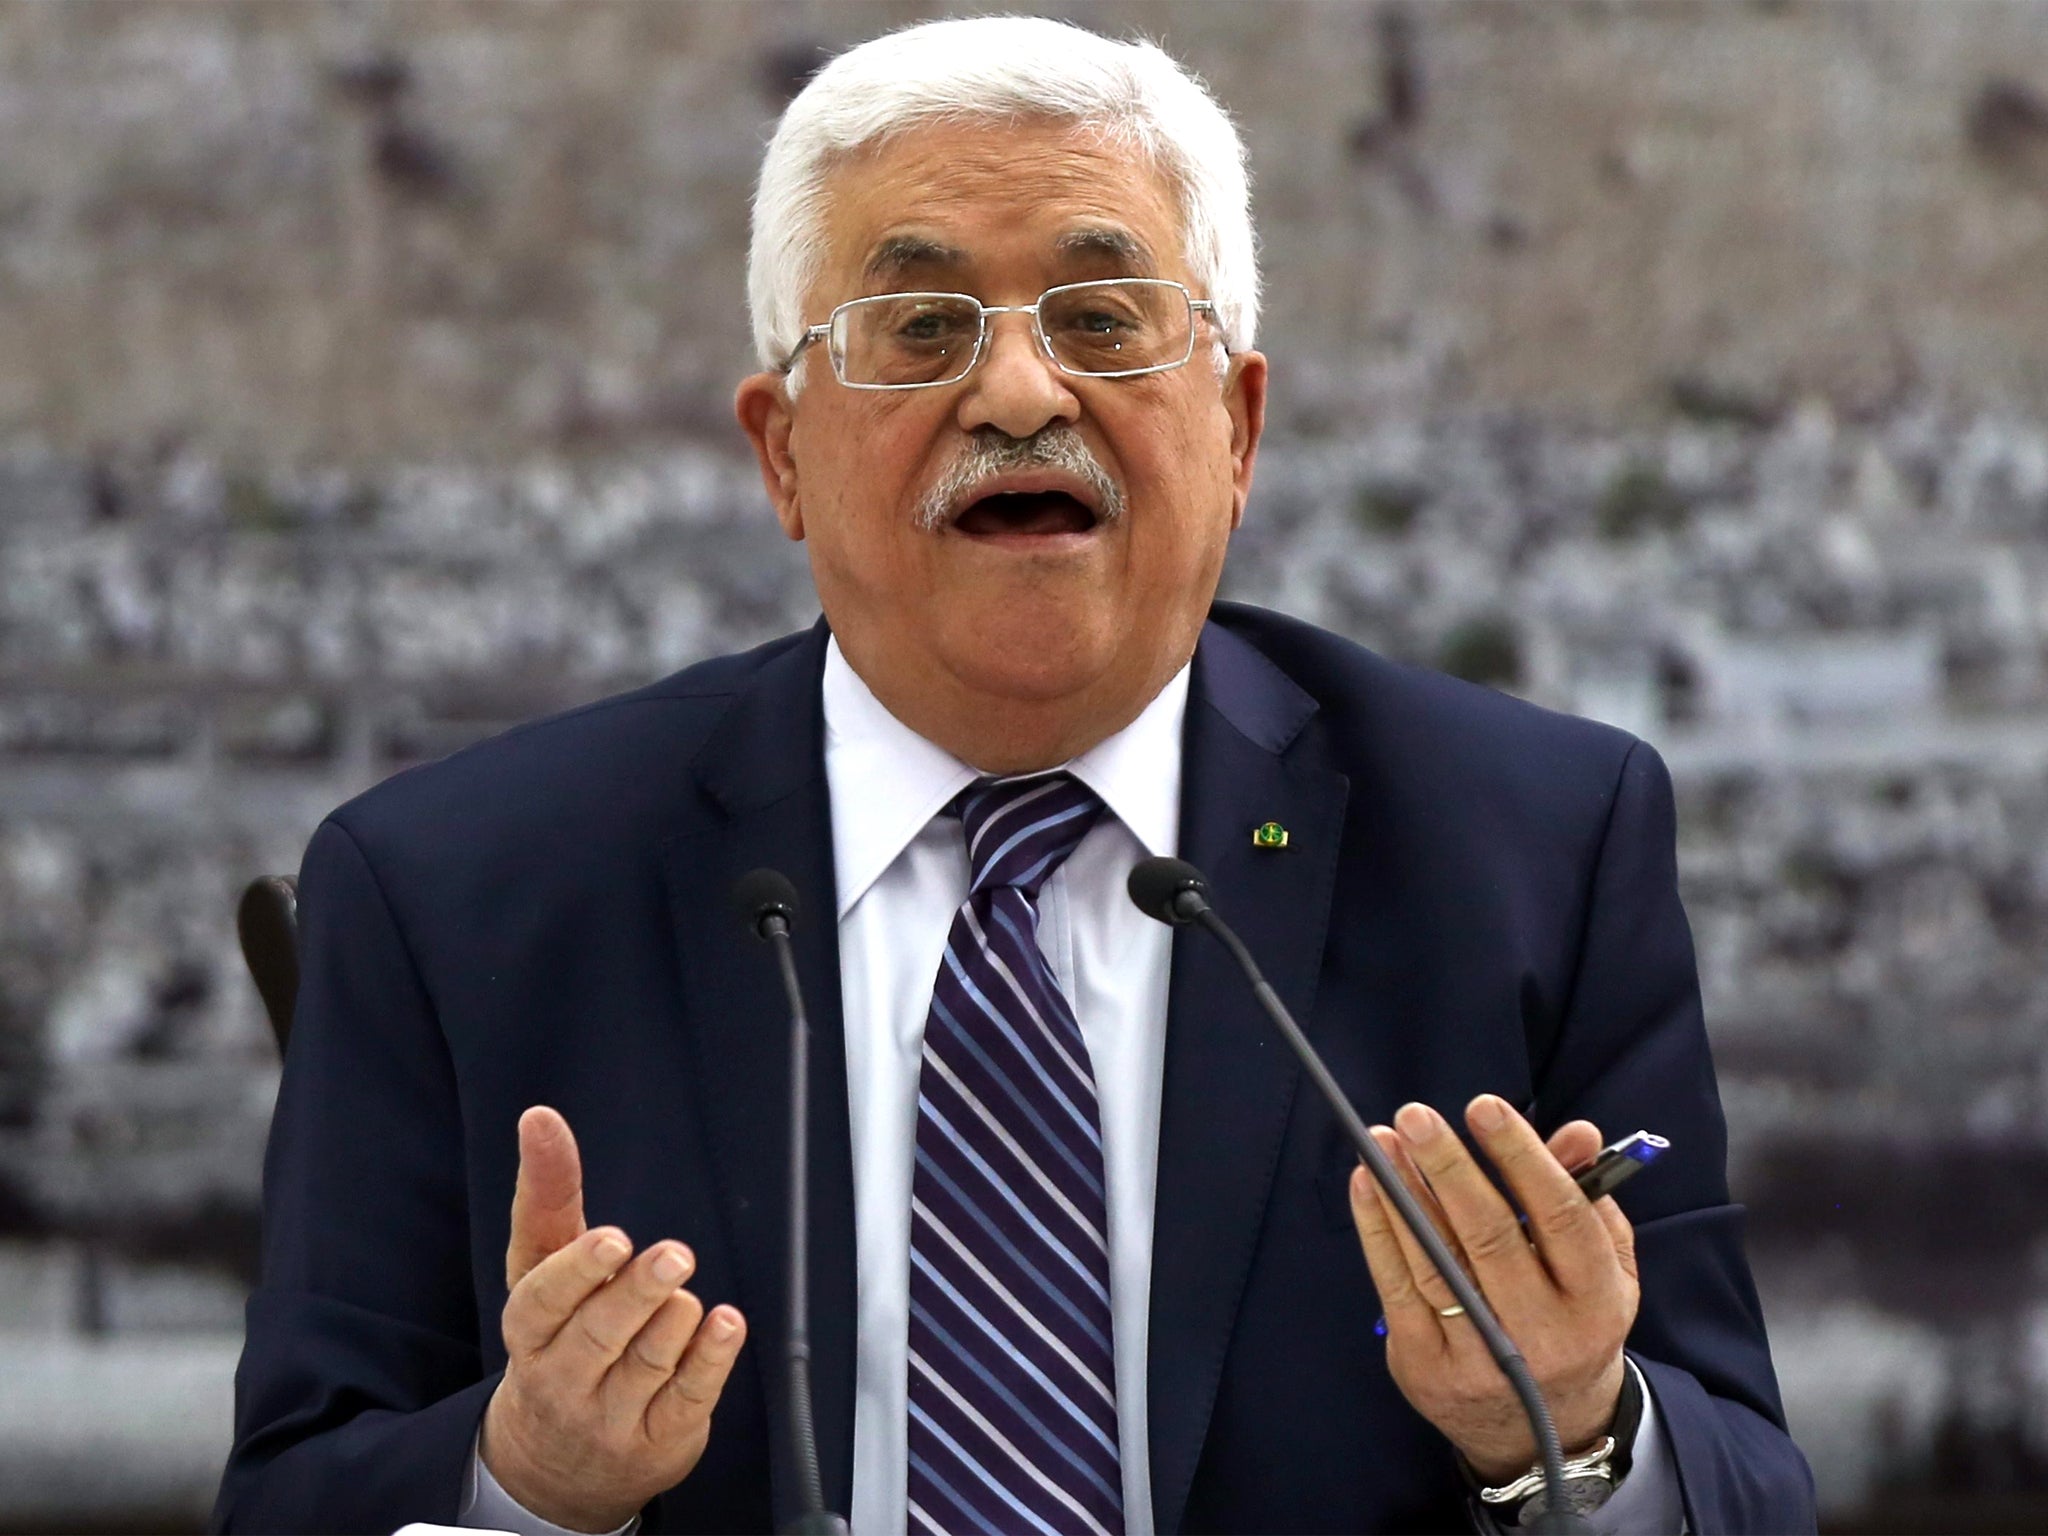 President Mahmoud Abbas chairs a meeting of the Palestinian leadership to discuss Israeli-Palestinian peace talks at his headquarters in the West Bank town of Ramallah